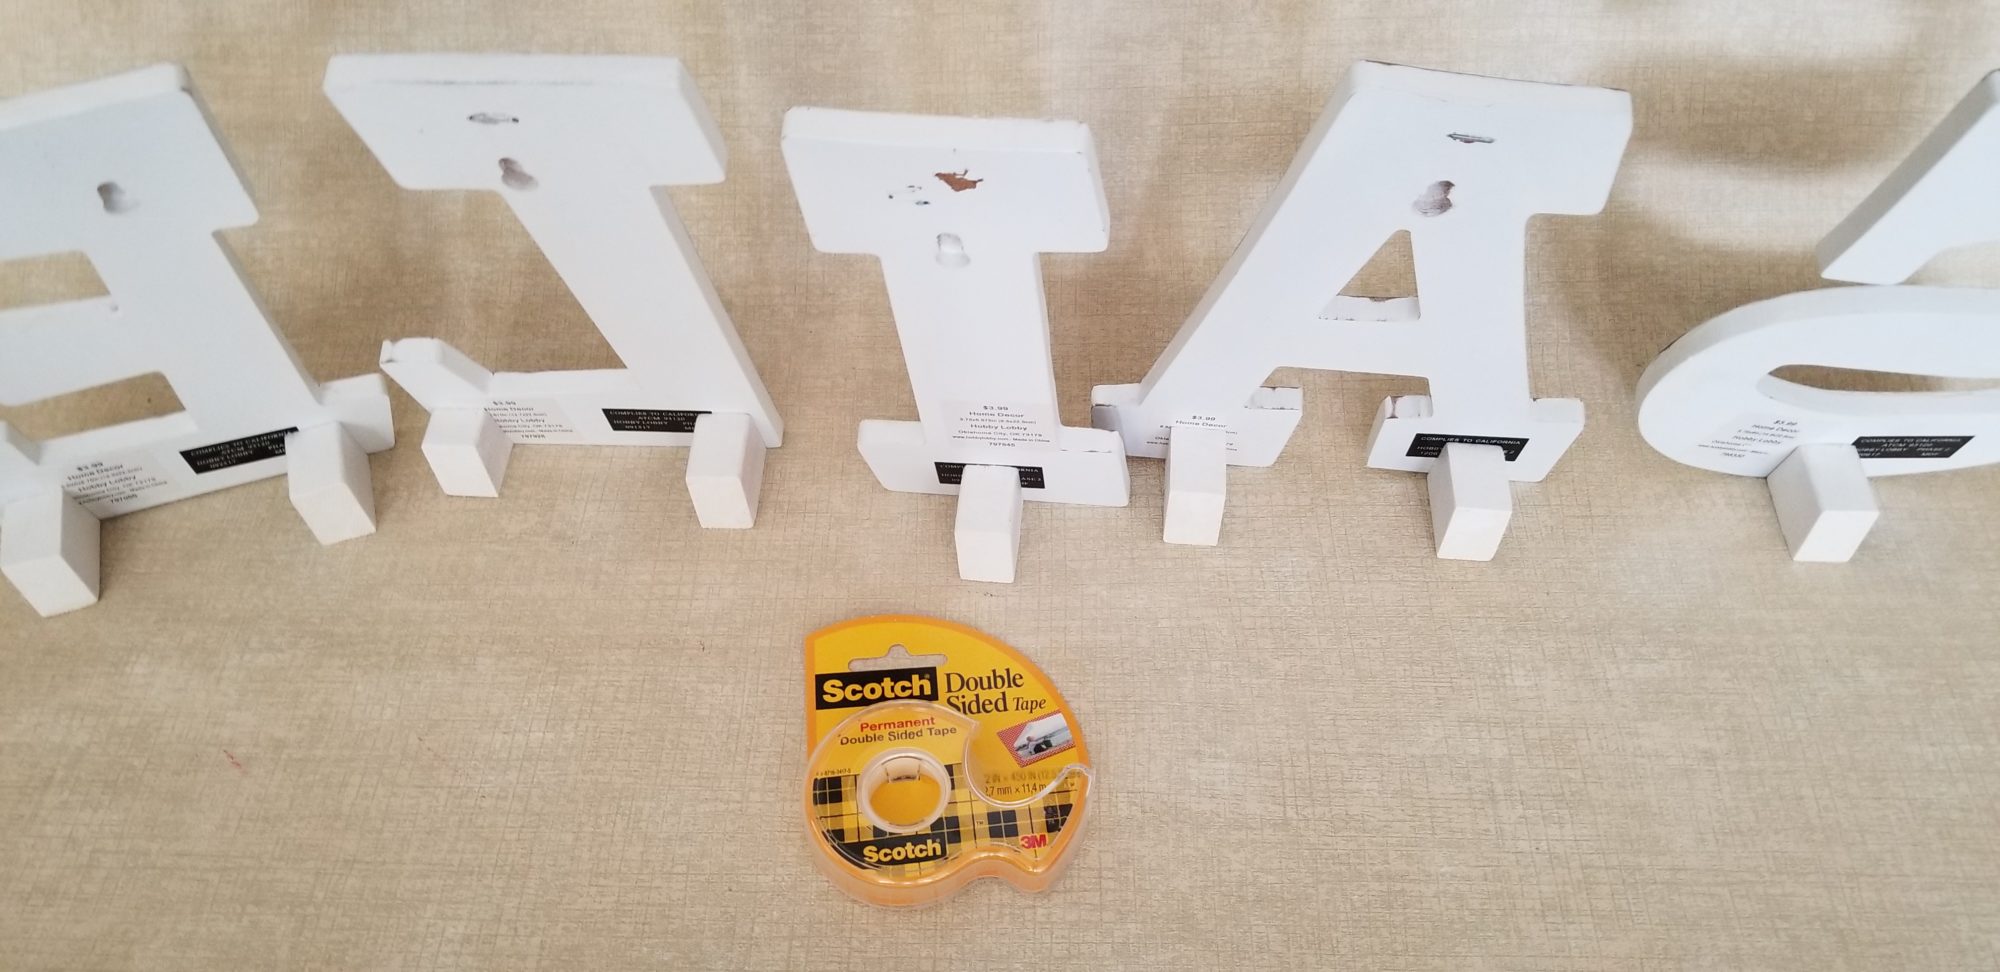 apply double stick tape to easels for temporary display